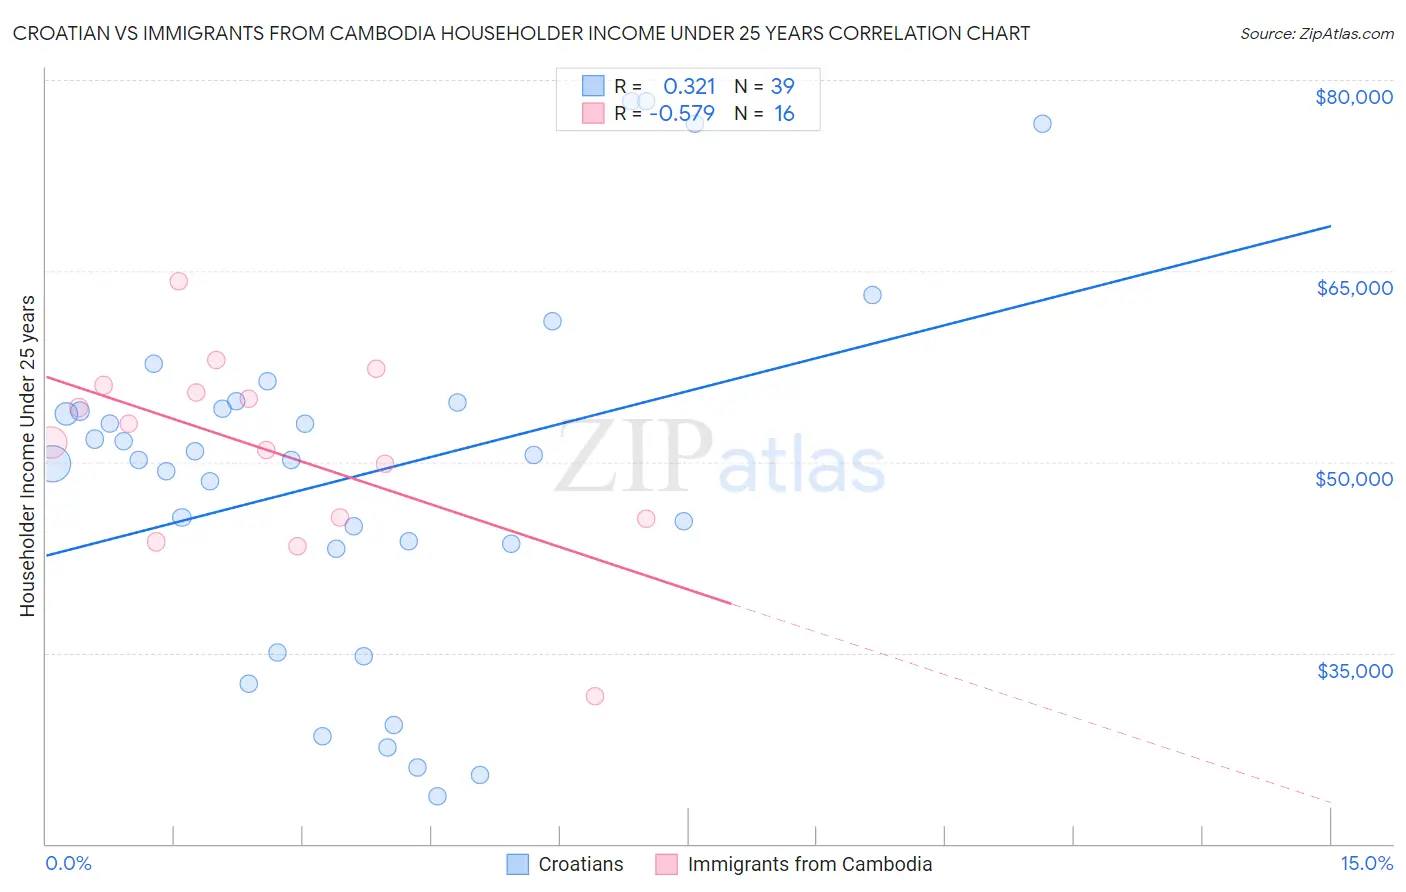 Croatian vs Immigrants from Cambodia Householder Income Under 25 years